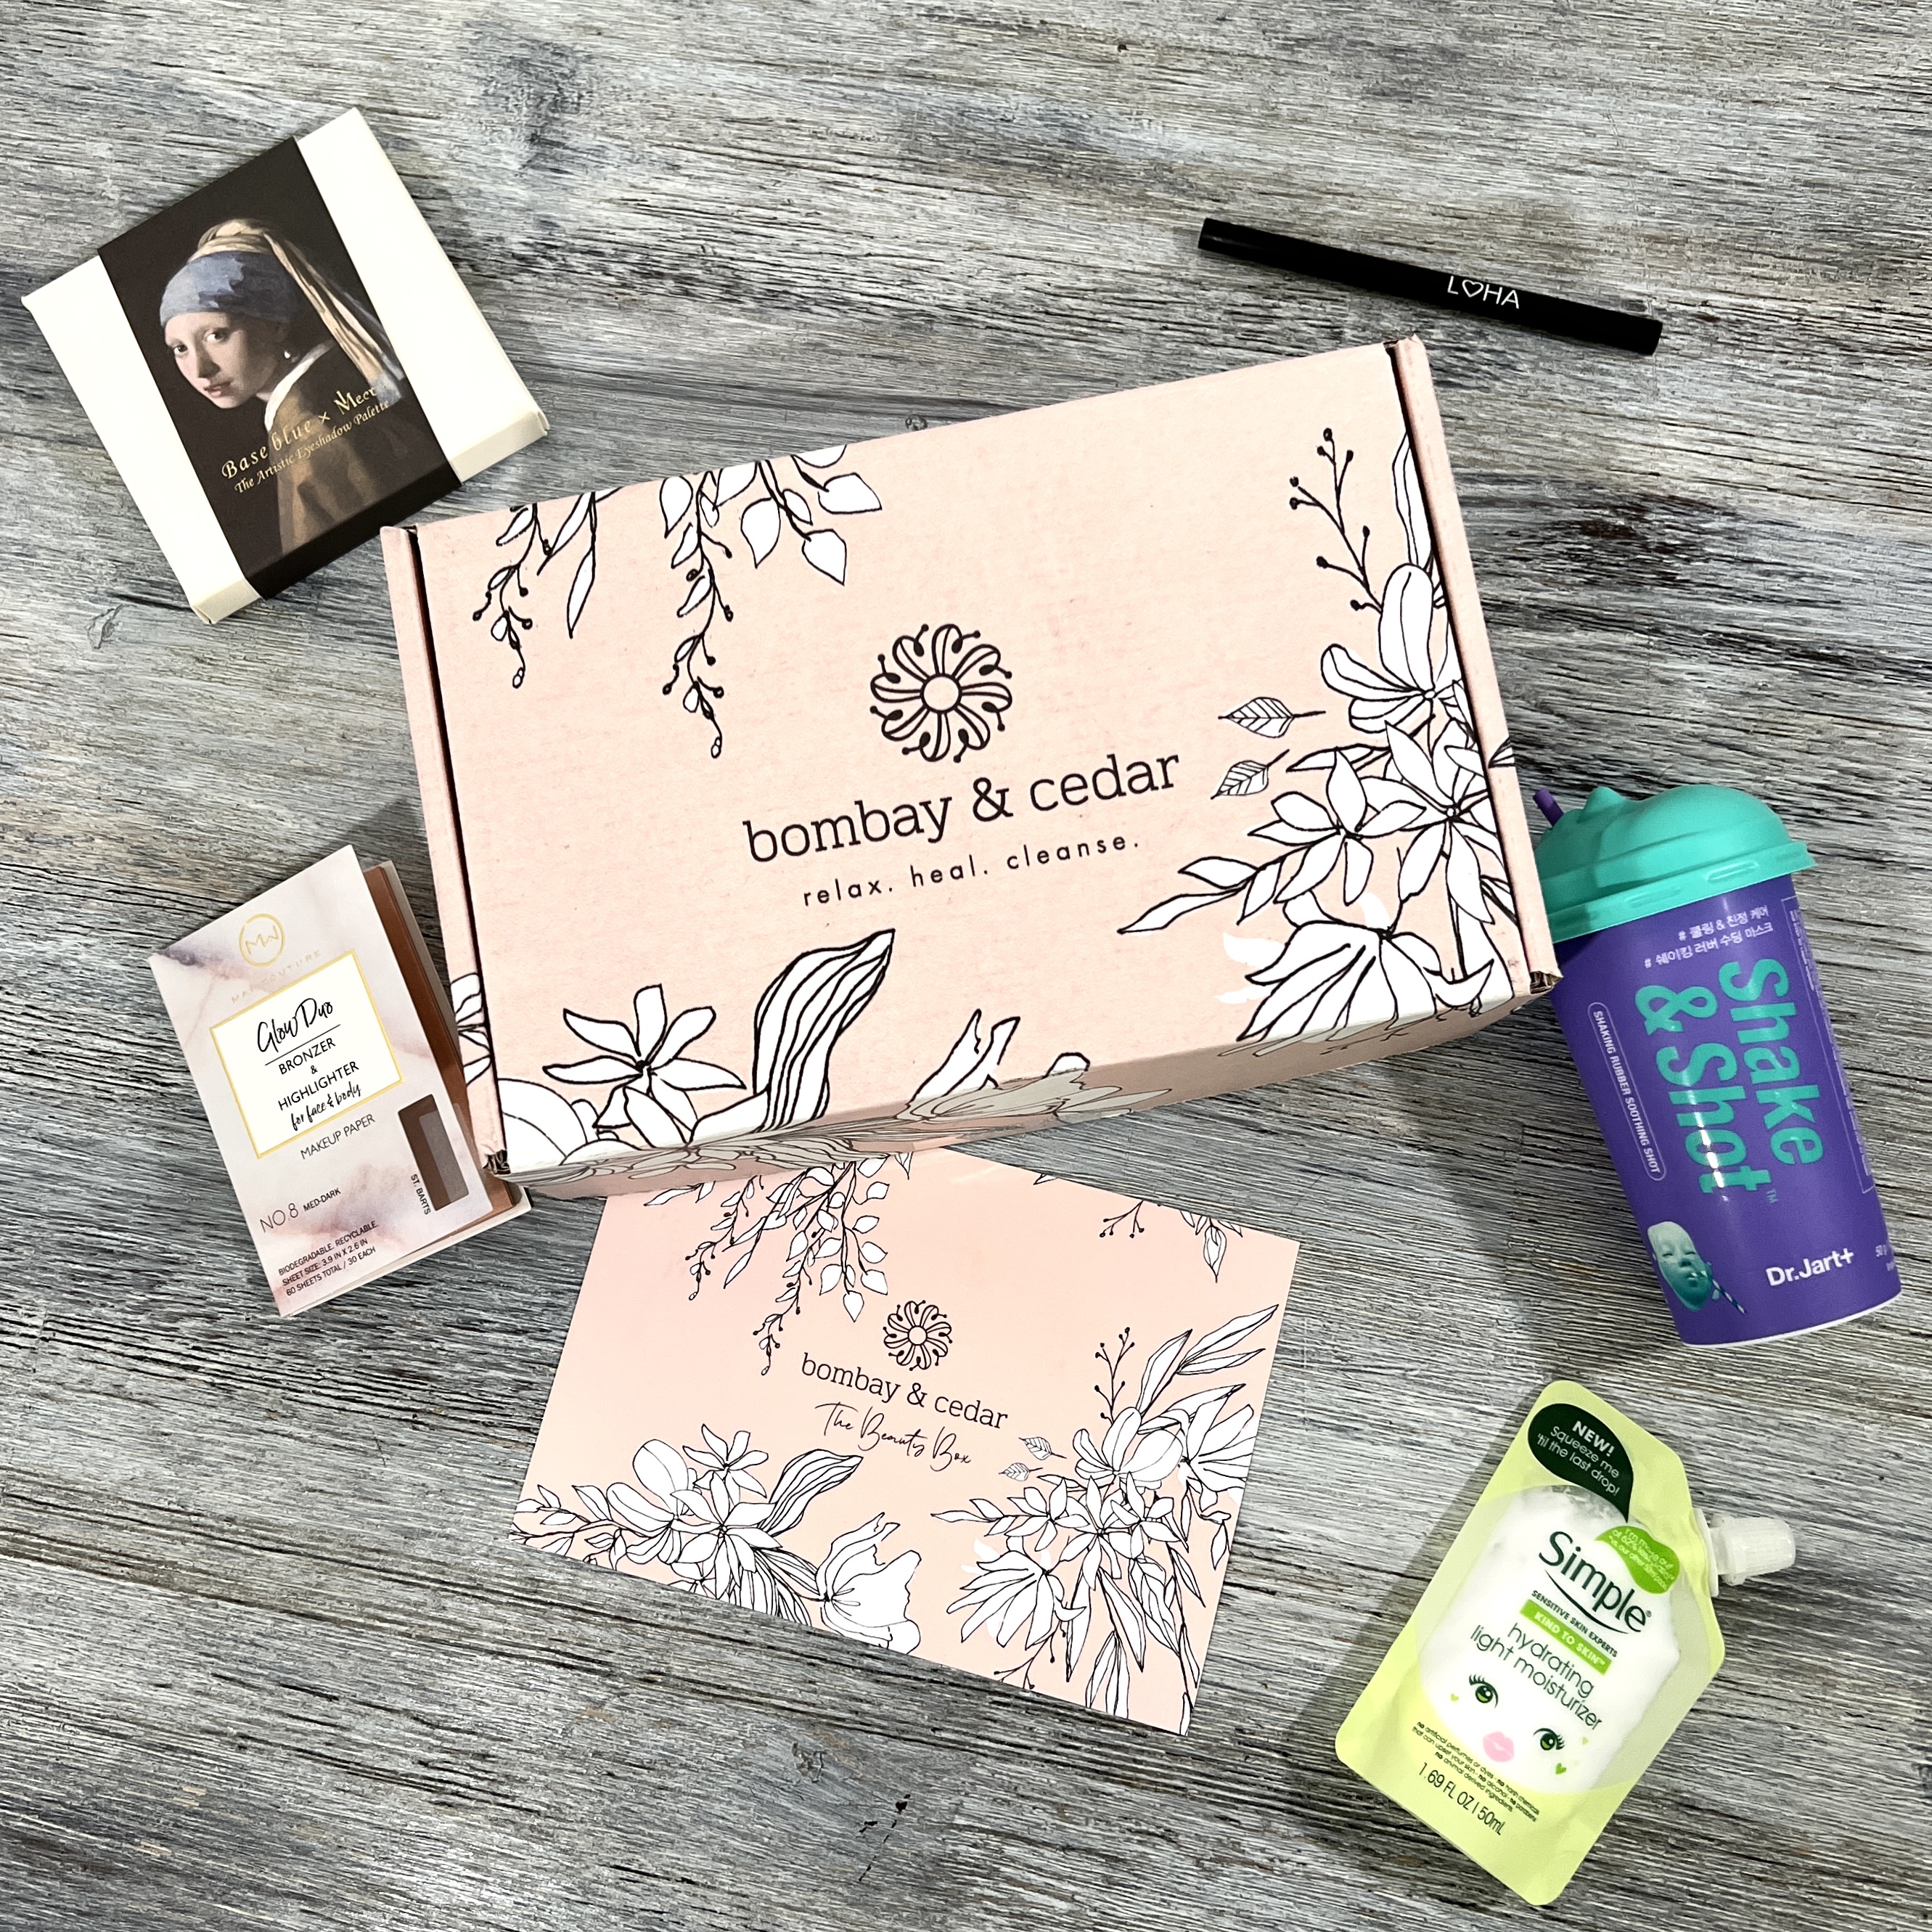 The Beauty Box by Bombay & Cedar “Artistic” Review + Coupon